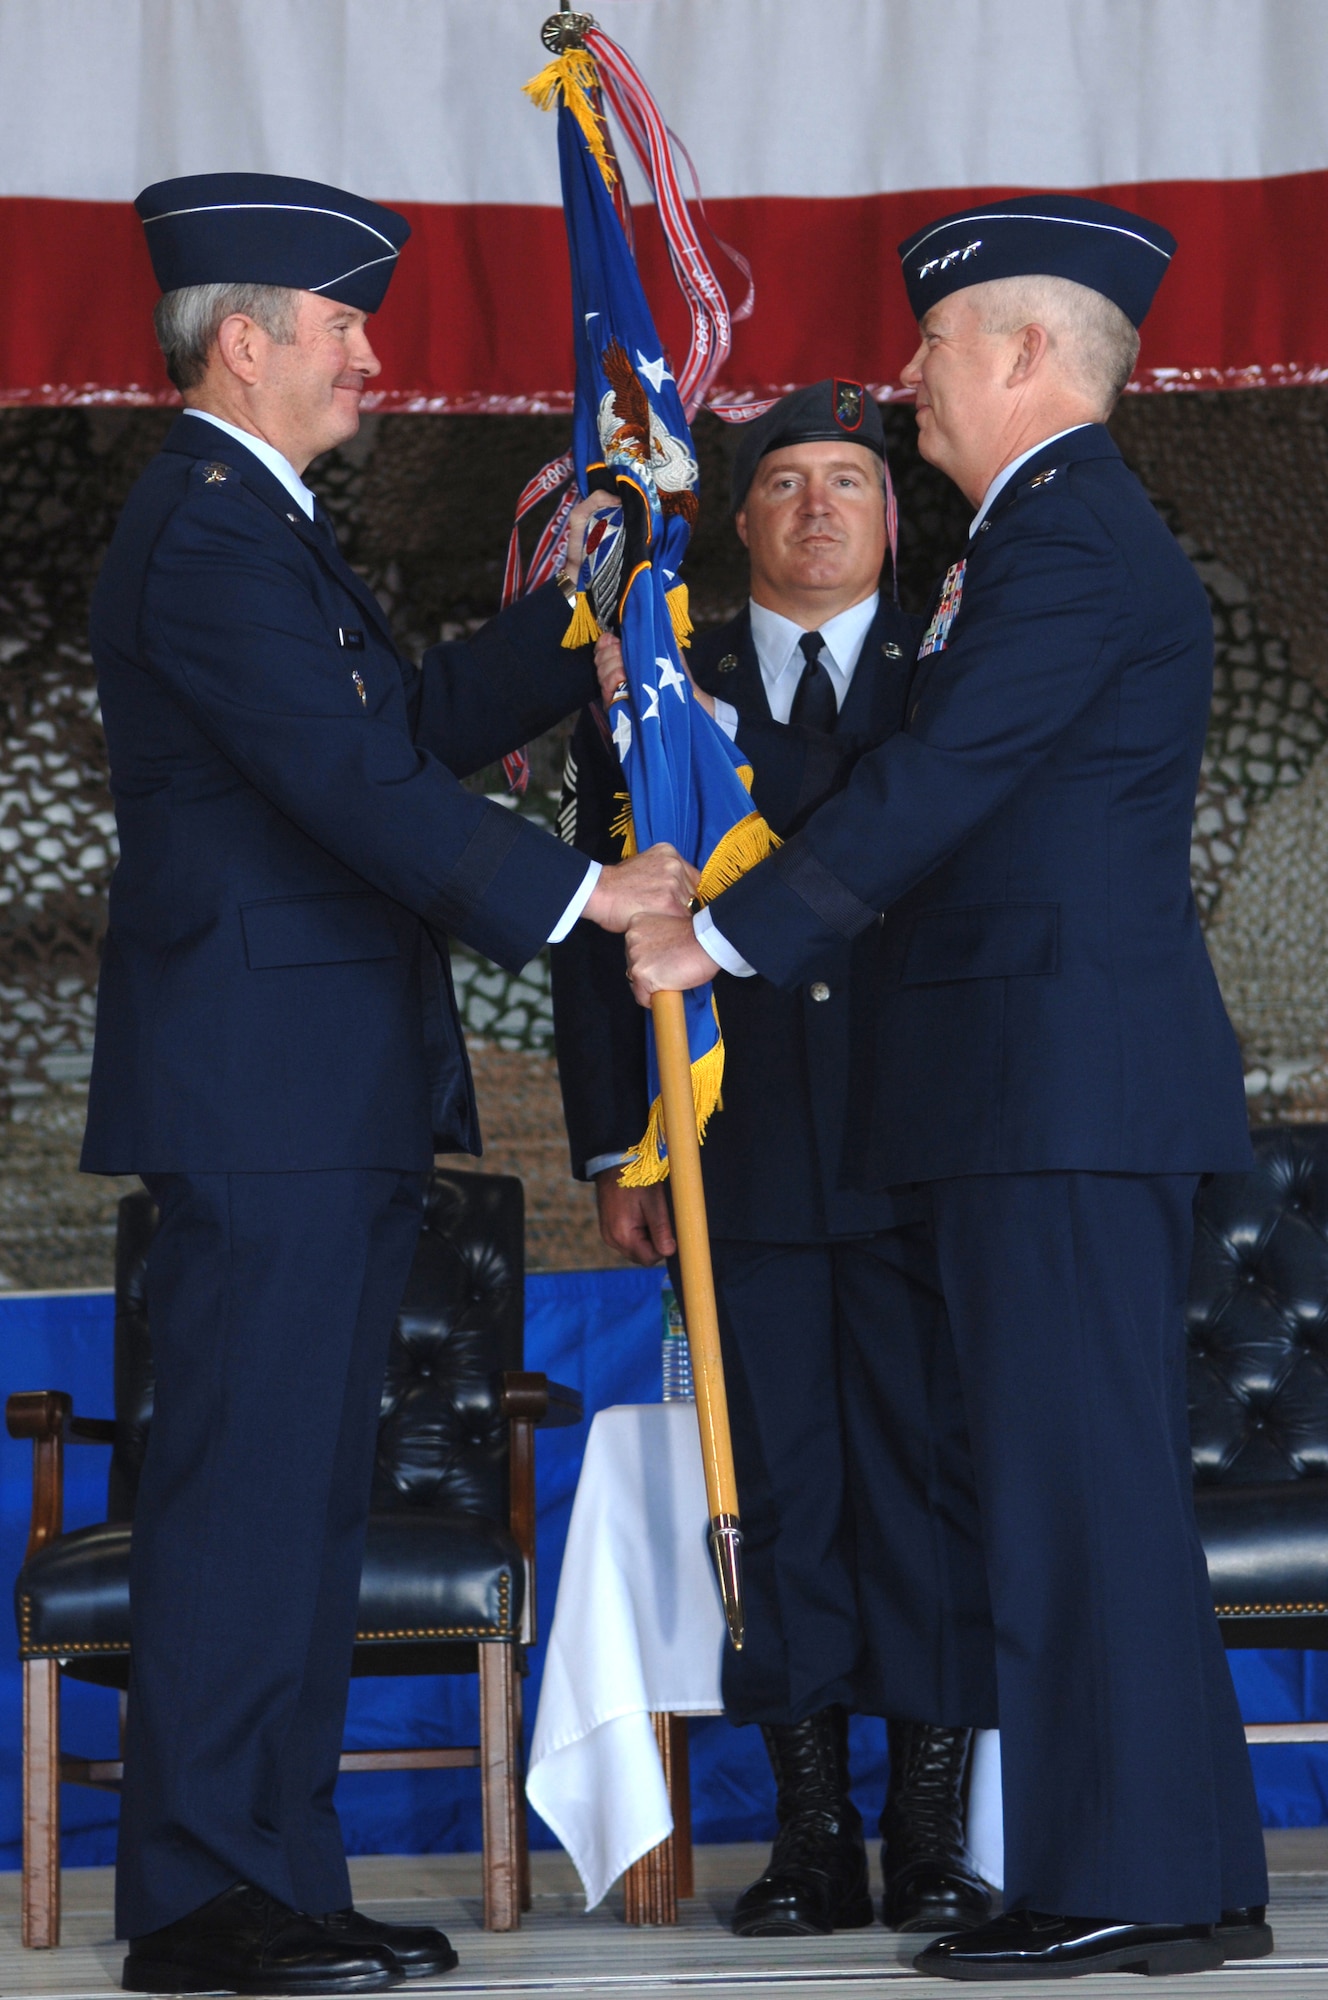 Lt. Gen. Donny Wurster (right) accepts command of Air Force Special Operations Command from Gen. Duncan McNabb (left), Air Force vice chief of staff, as Chief Master Sgt. Michael Gilbert (center), AFSOC command chief, looks on during the AFSOC change of command ceremony Nov. 27 at Hurlburt Field, Fla. General Wurster, who's previous assignment was AFSOC vice commander, also made history that day becoming the first Air Force helicopter pilot promoted to lieutenant general. (U.S. Air Force photo/Senior Airman Ali Flisek)